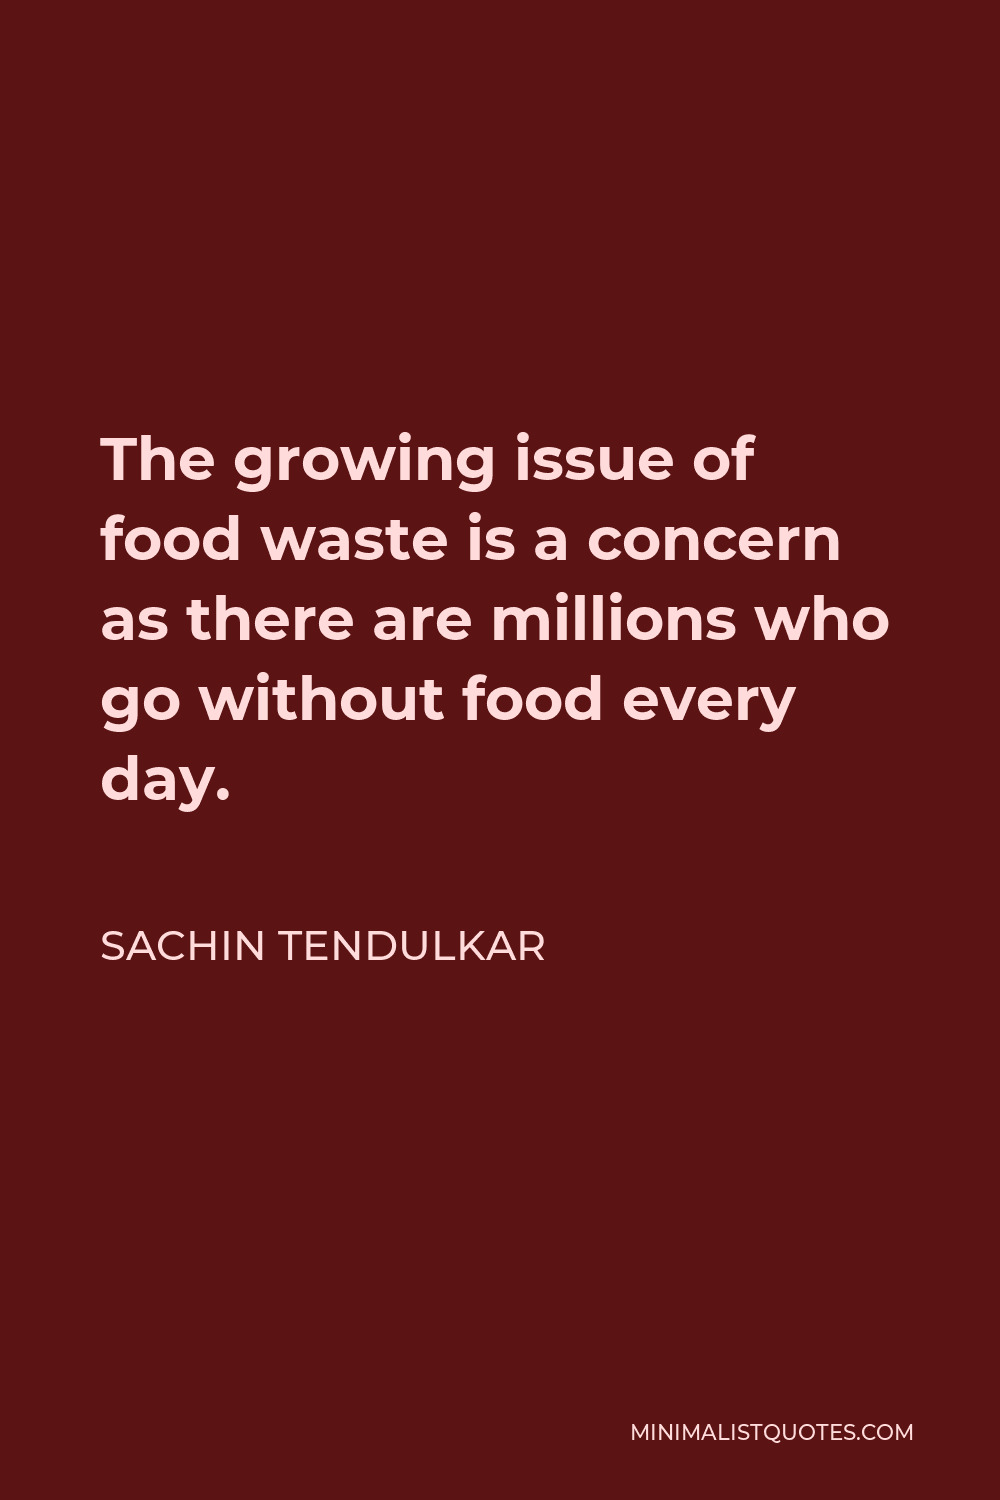 Sachin Tendulkar Quote - The growing issue of food waste is a concern as there are millions who go without food every day.